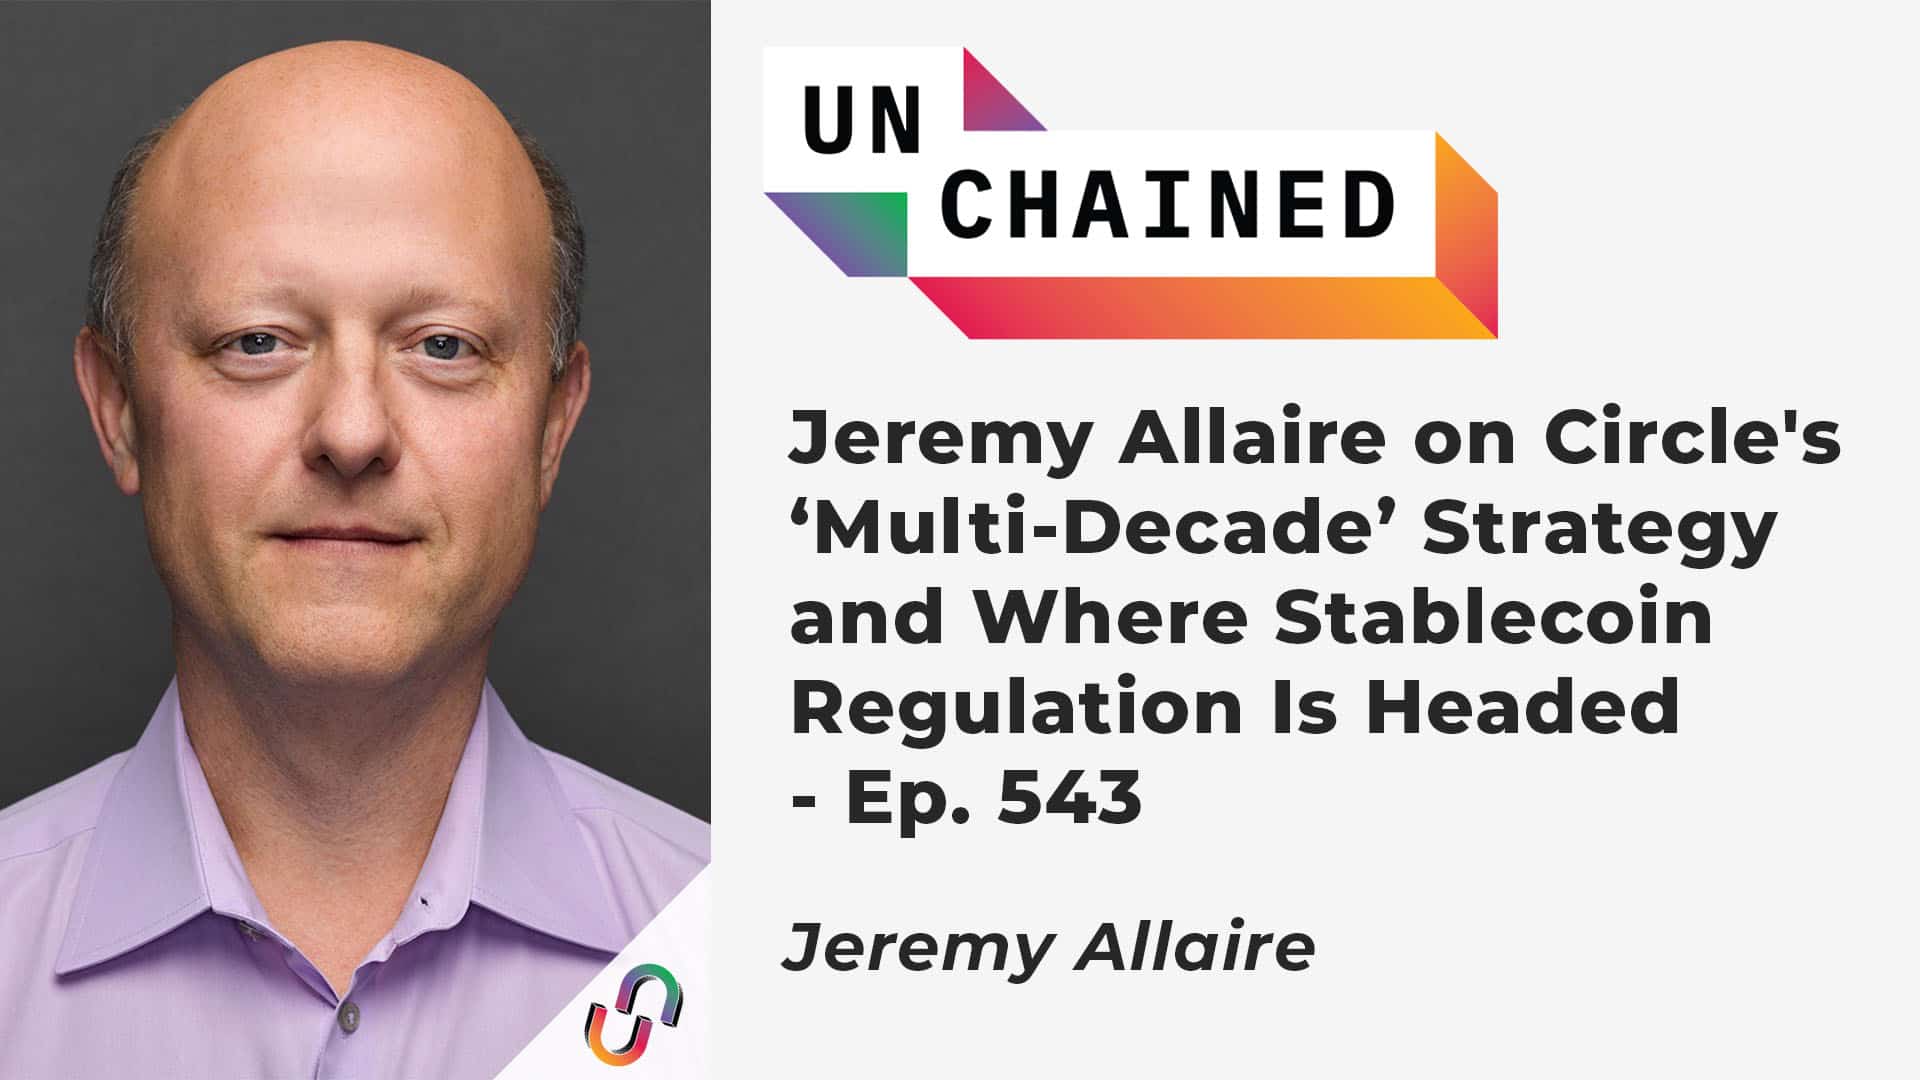 Jeremy Allaire on Circle's ‘Multi-Decade’ Strategy and Where Stablecoin Regulation Is Headed - Ep. 543